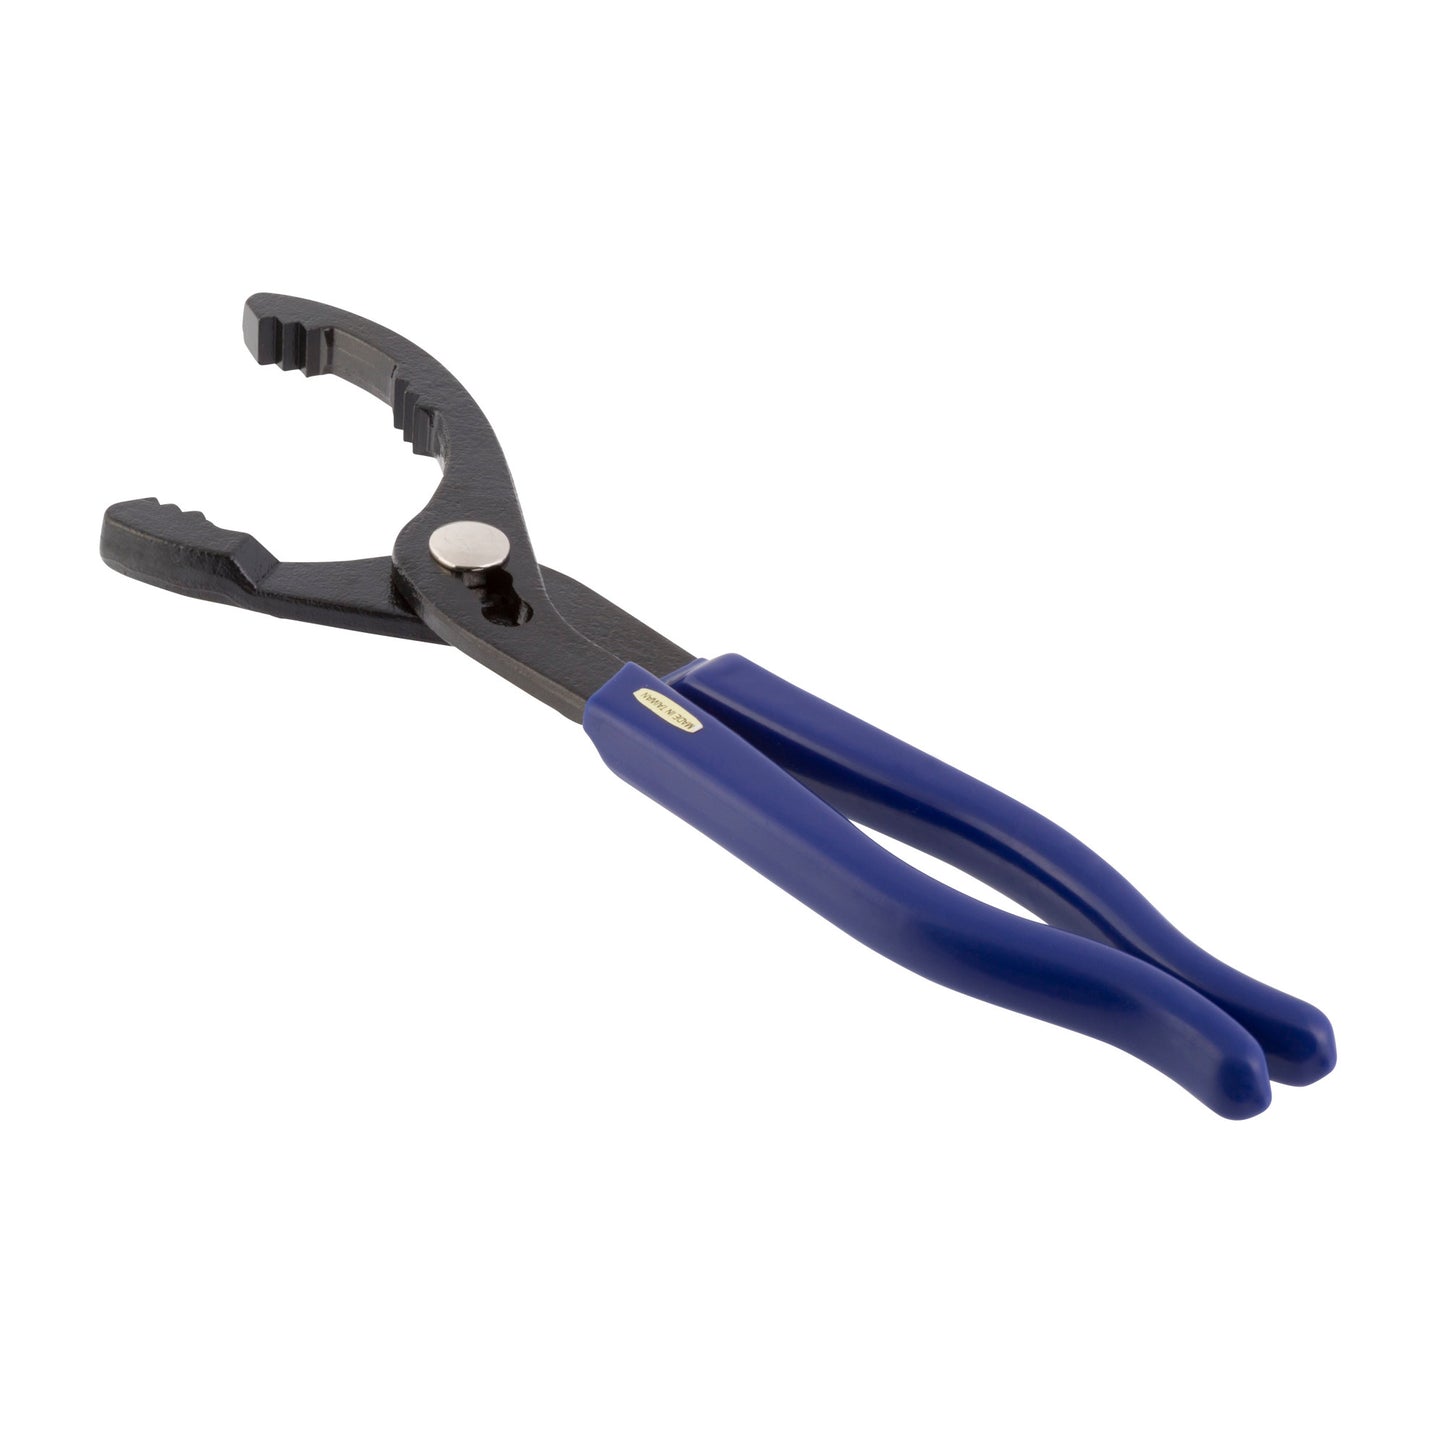 10-inch Small Oil Filter Pliers